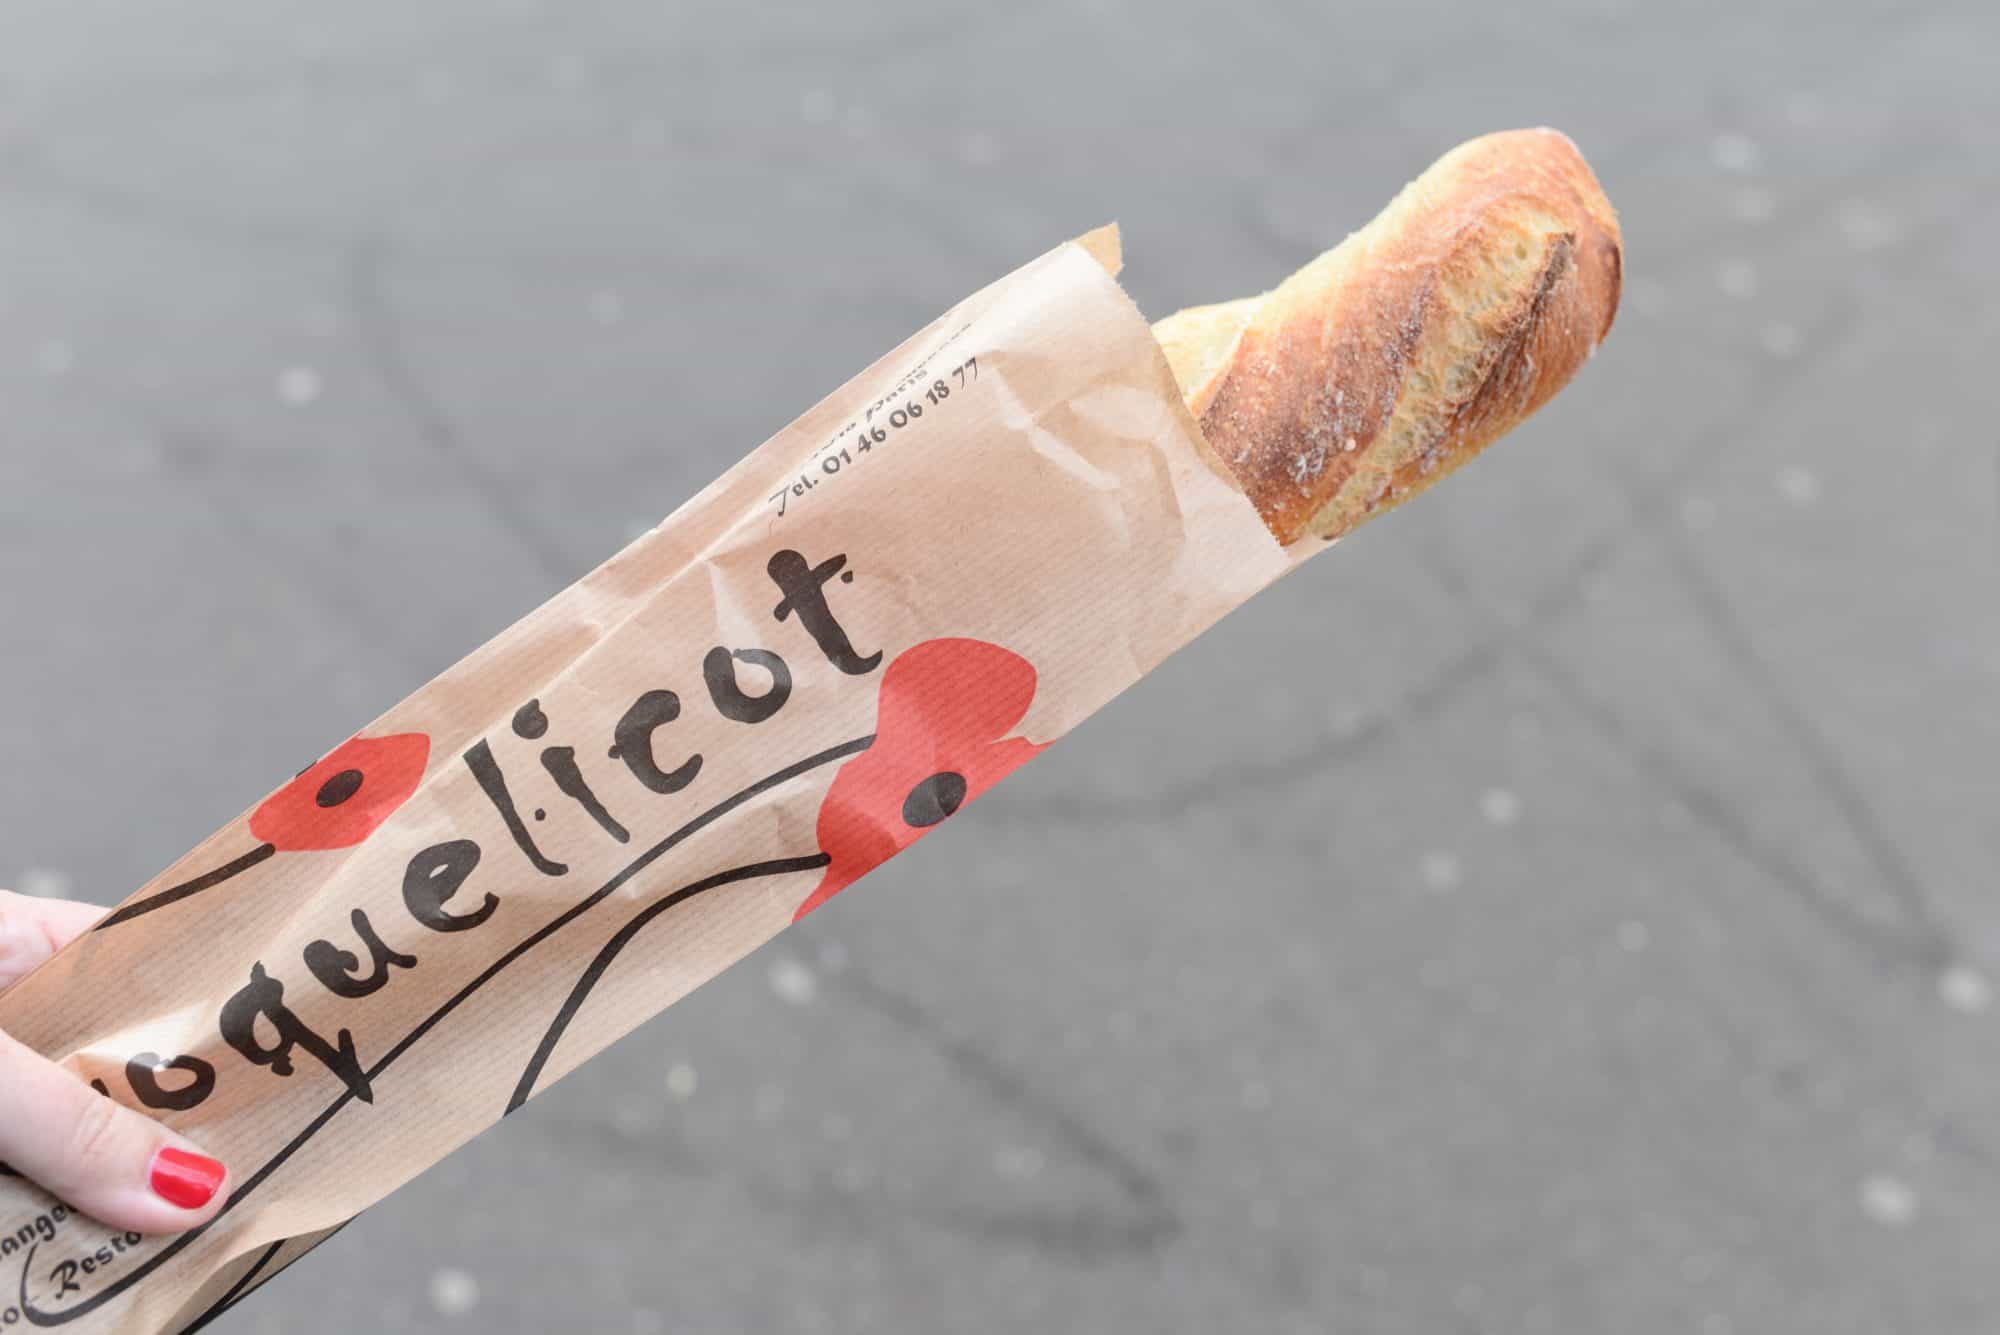 A crusty French baguette of bread in Paris.